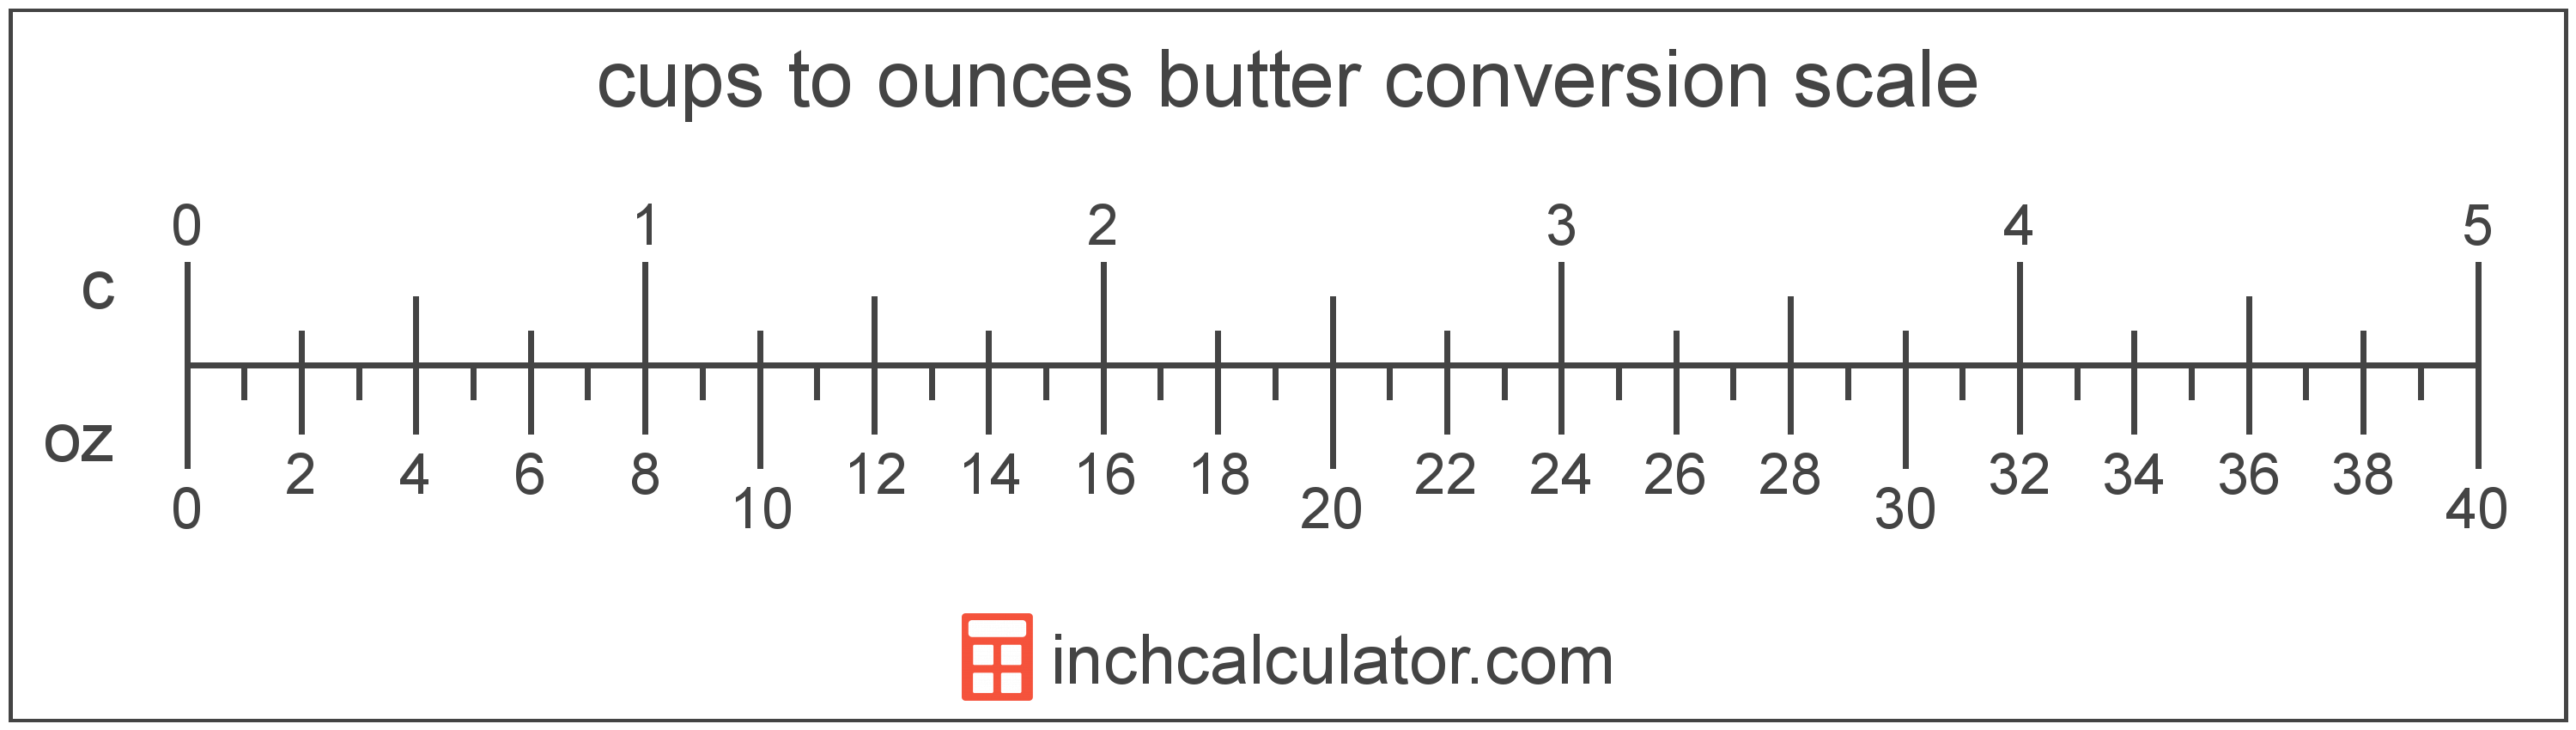 conversion scale showing cups and equivalent ounces butter values